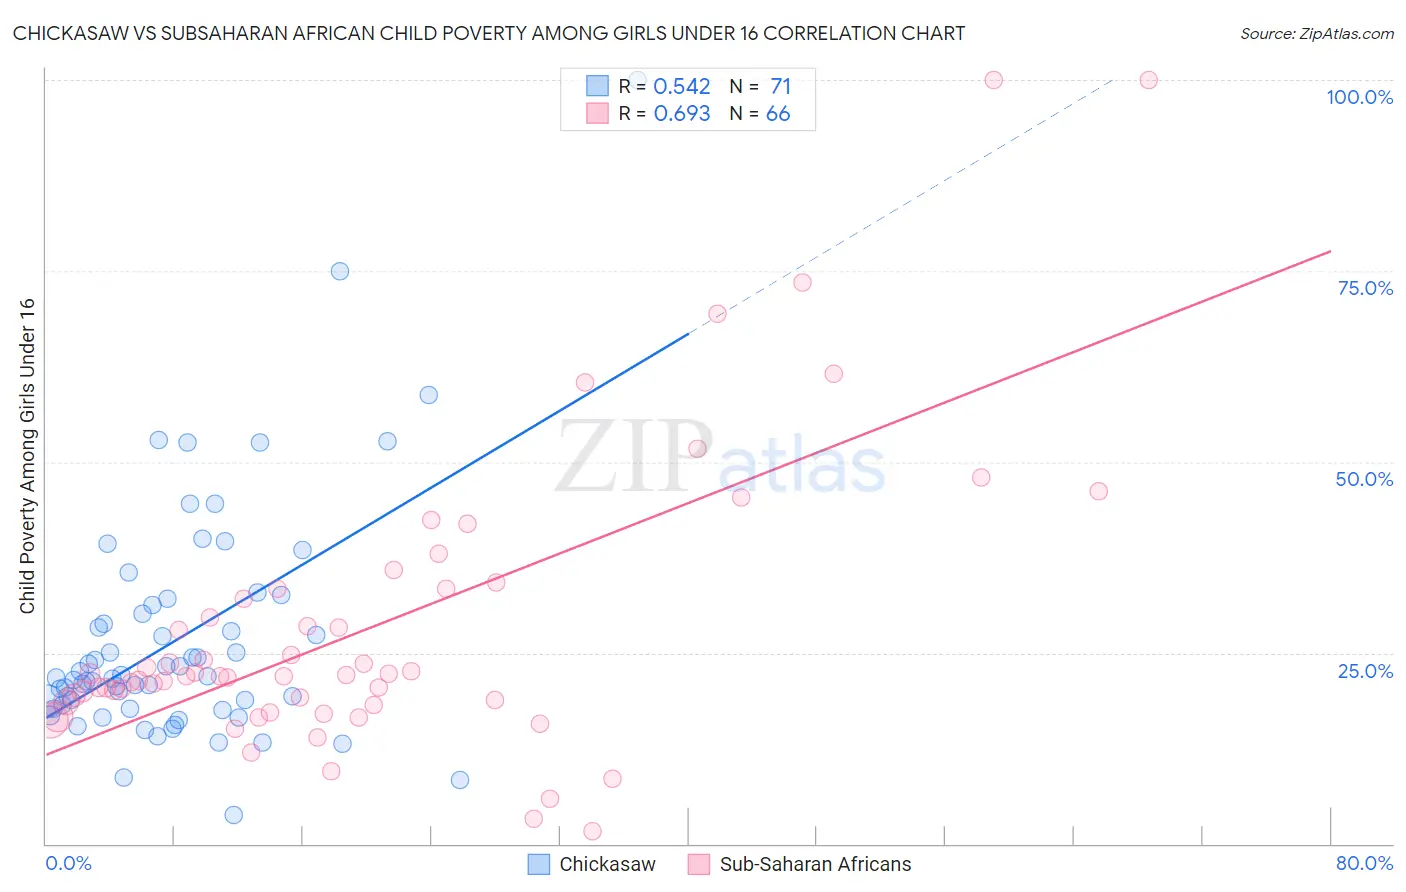 Chickasaw vs Subsaharan African Child Poverty Among Girls Under 16